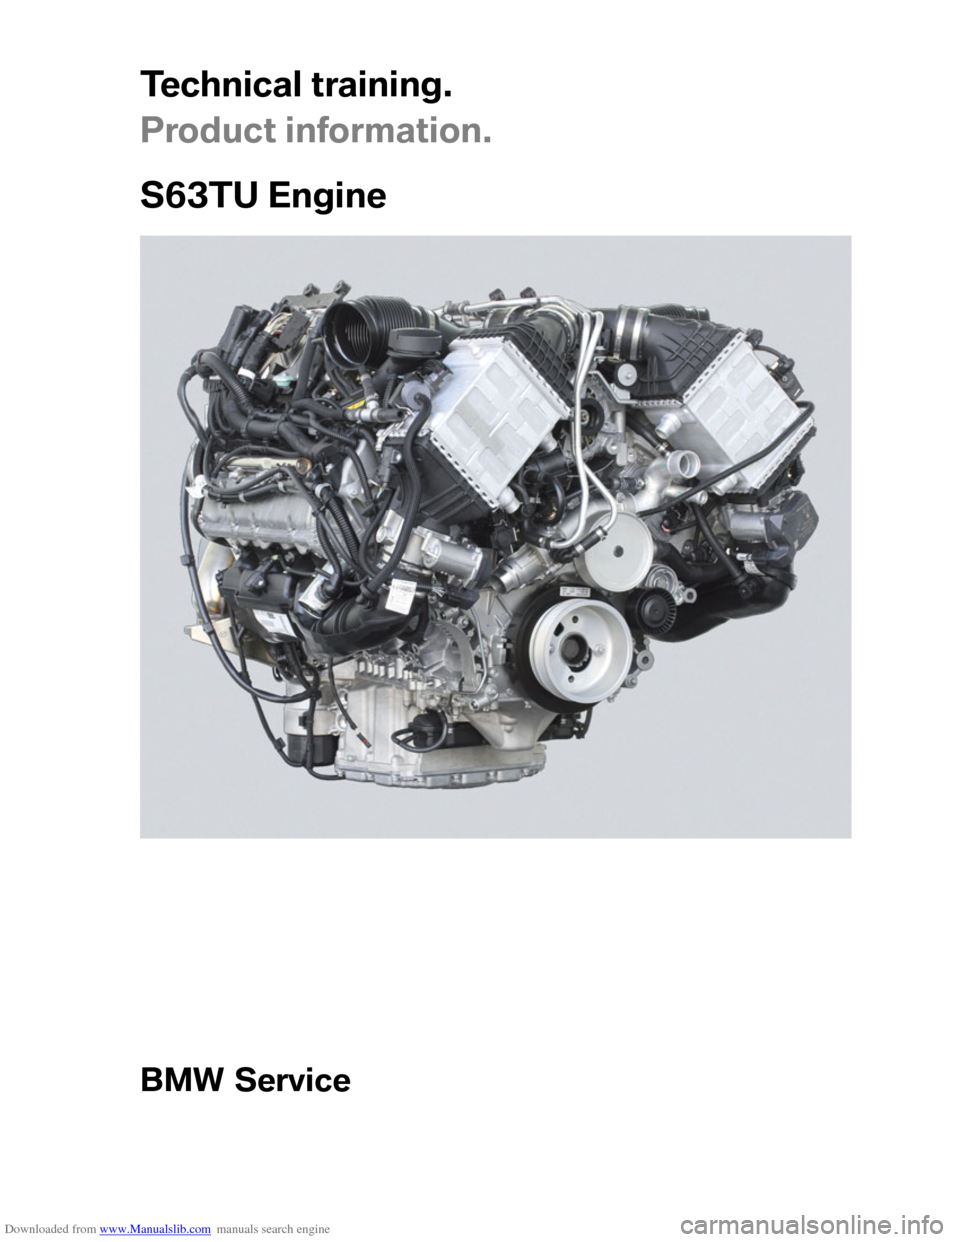 BMW M6 2012 F12 S63TU Engine Technical Training Manual Downloaded from www.Manualslib.com manuals search engine ��
���
����������
��
��
����������
���������
�
���� ��
�����
�������	�
���
�
  